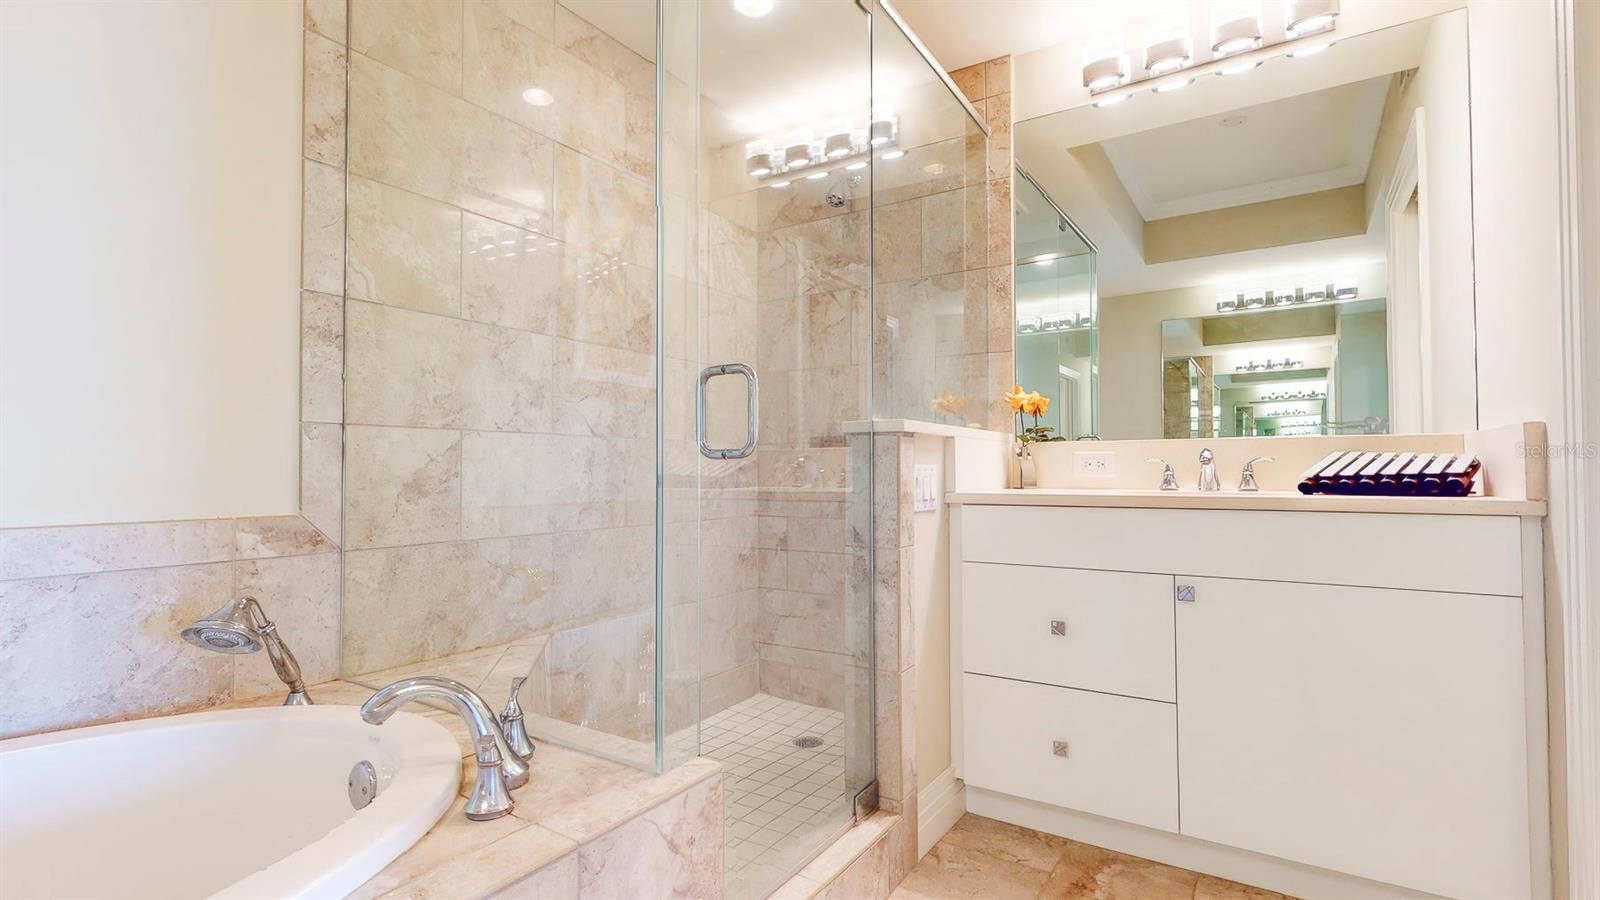 Primary bathroom shower to bathtub and other separate sink!